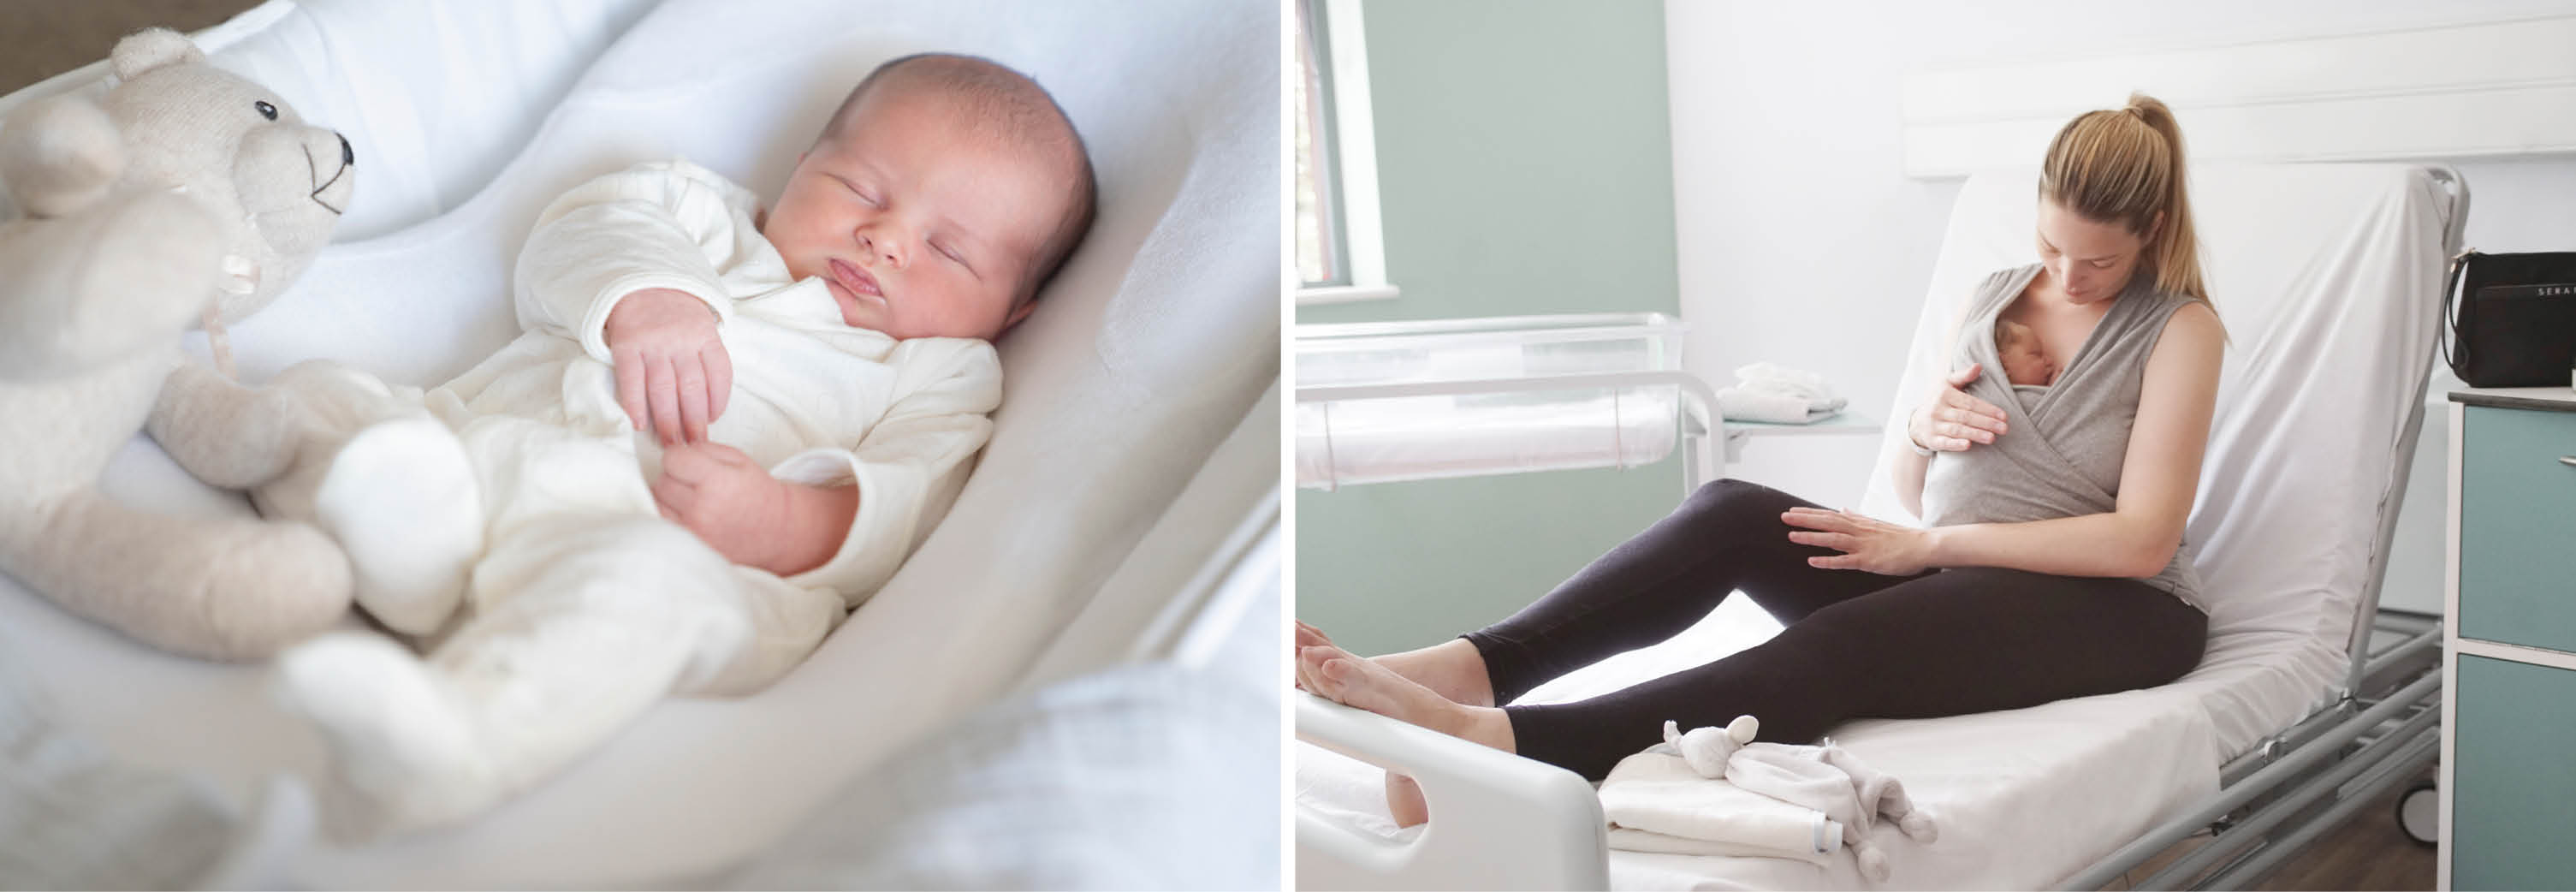 3 ways to prepare for labor & life with a newborn